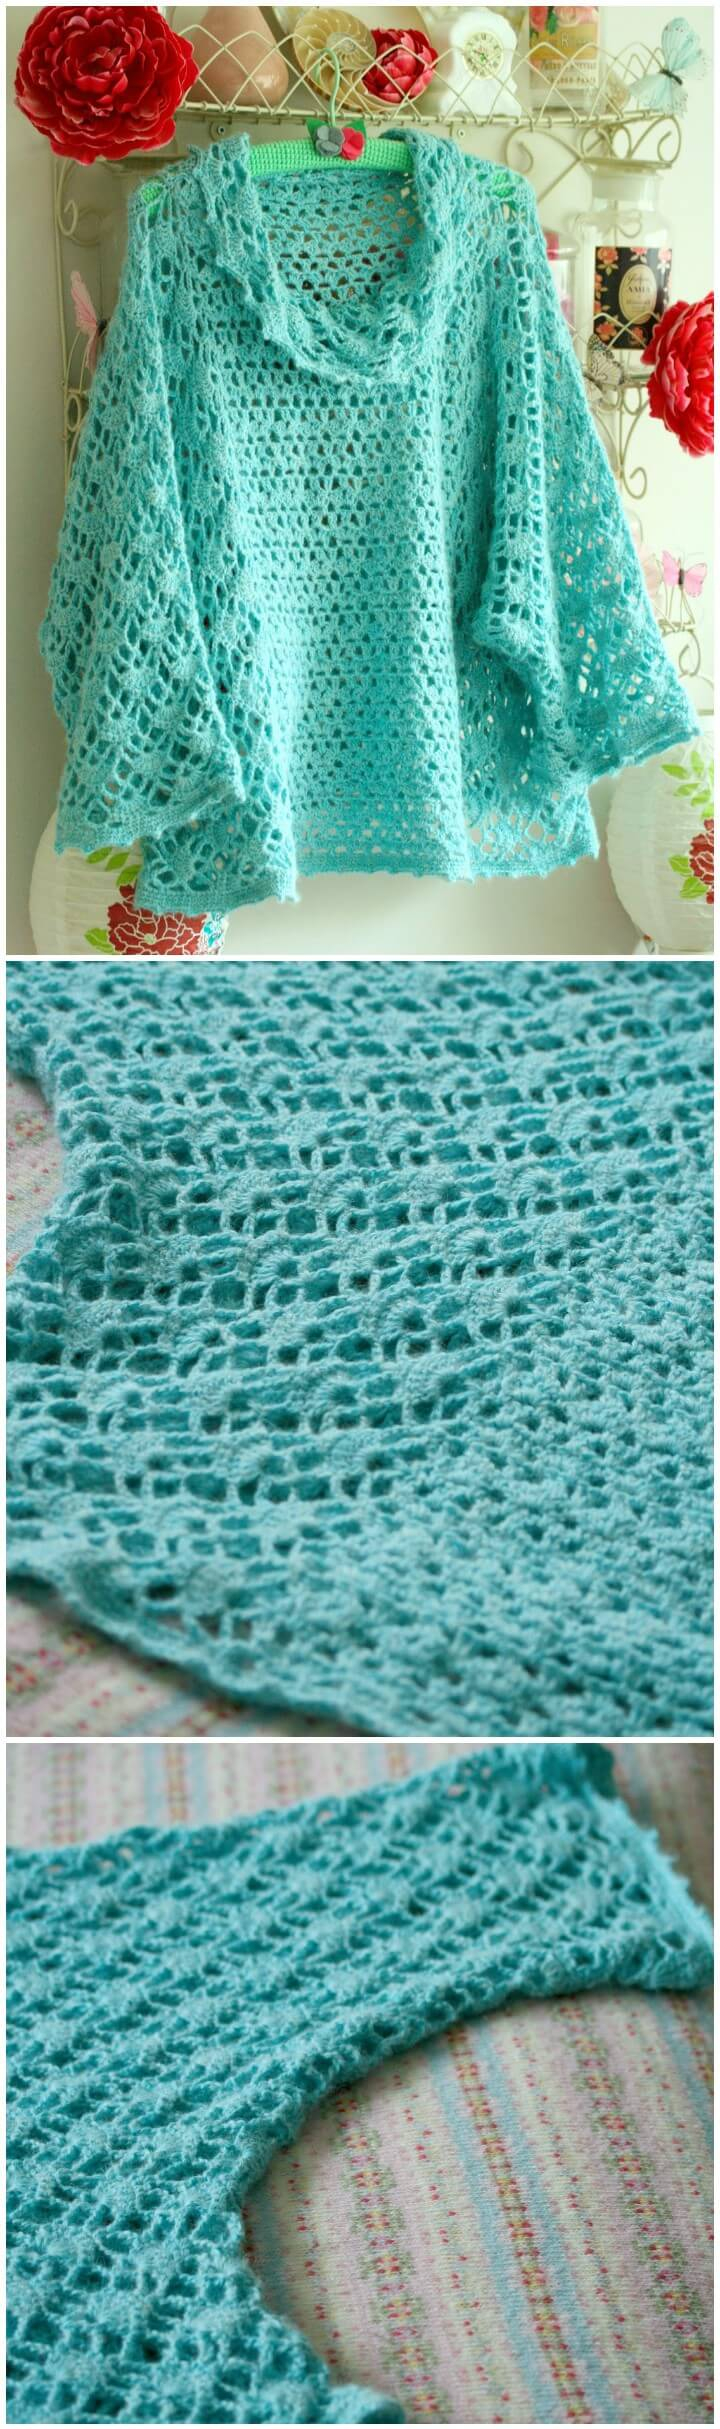 Crochet Cowl Neck Poncho Pattern 50 Free Crochet Poncho Patterns For All Diy Crafts